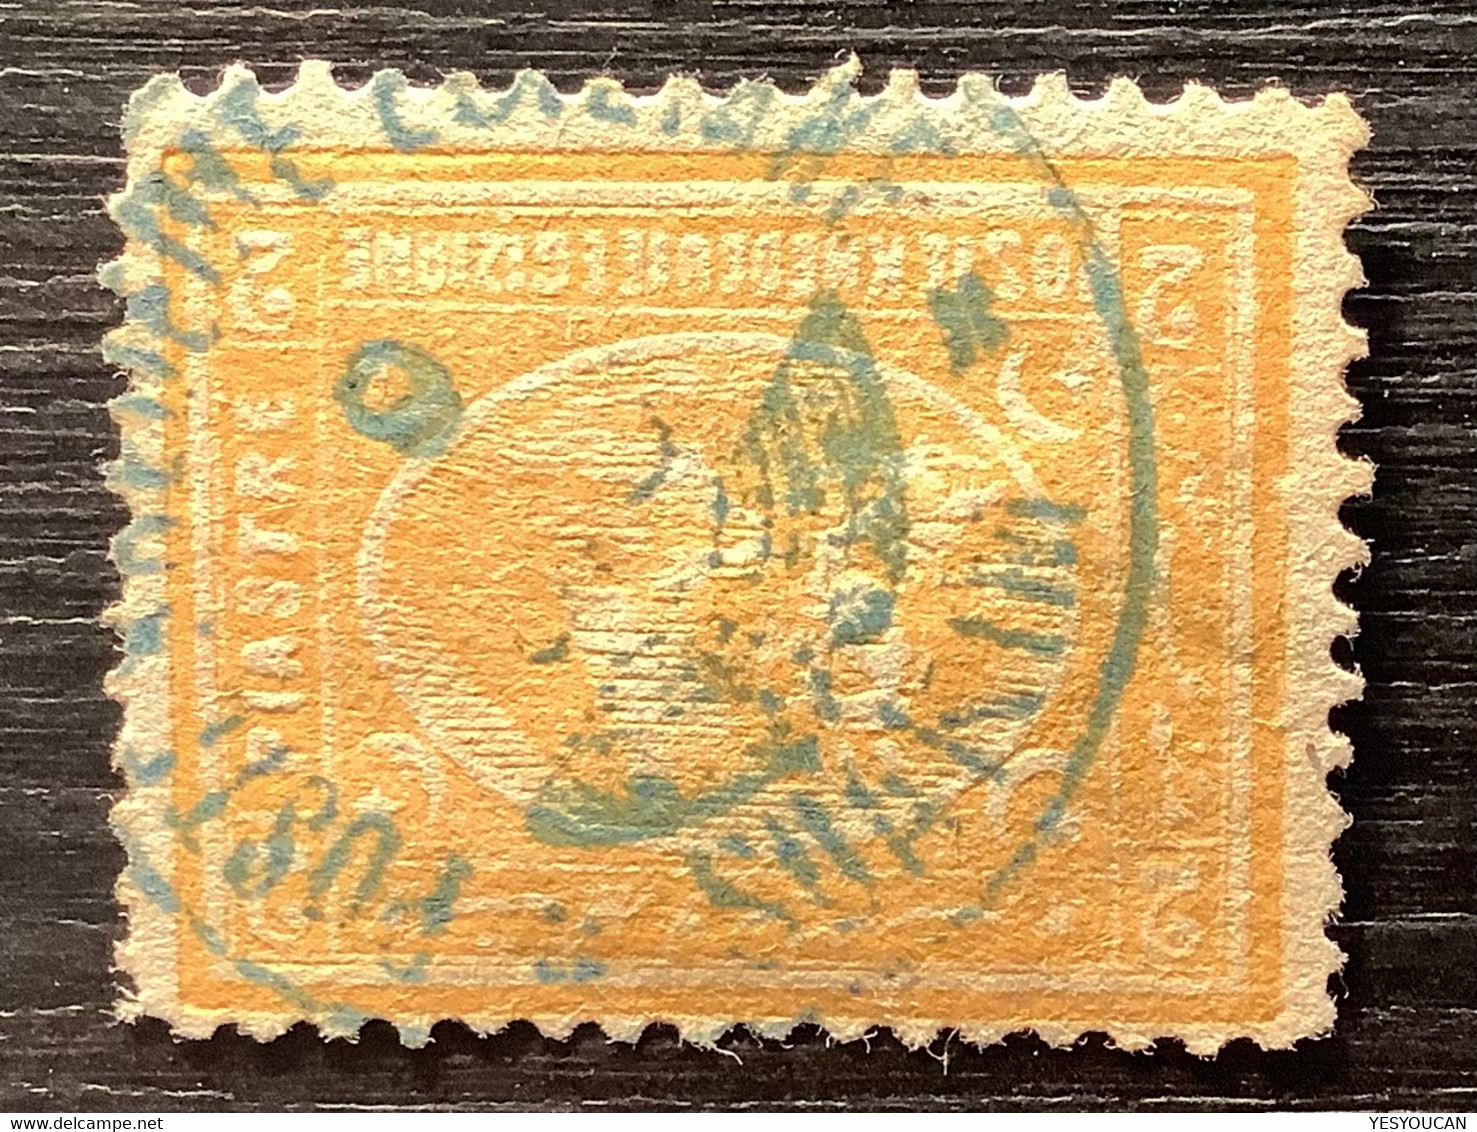 Egypt Used In Sudan: SUAKIM RRR ! (Suakin Soudan) On 1872 2 Pi ONLY ONE COVER KNOWN WITH THIS POSTMARK (Egypte - 1866-1914 Khedivato De Egipto